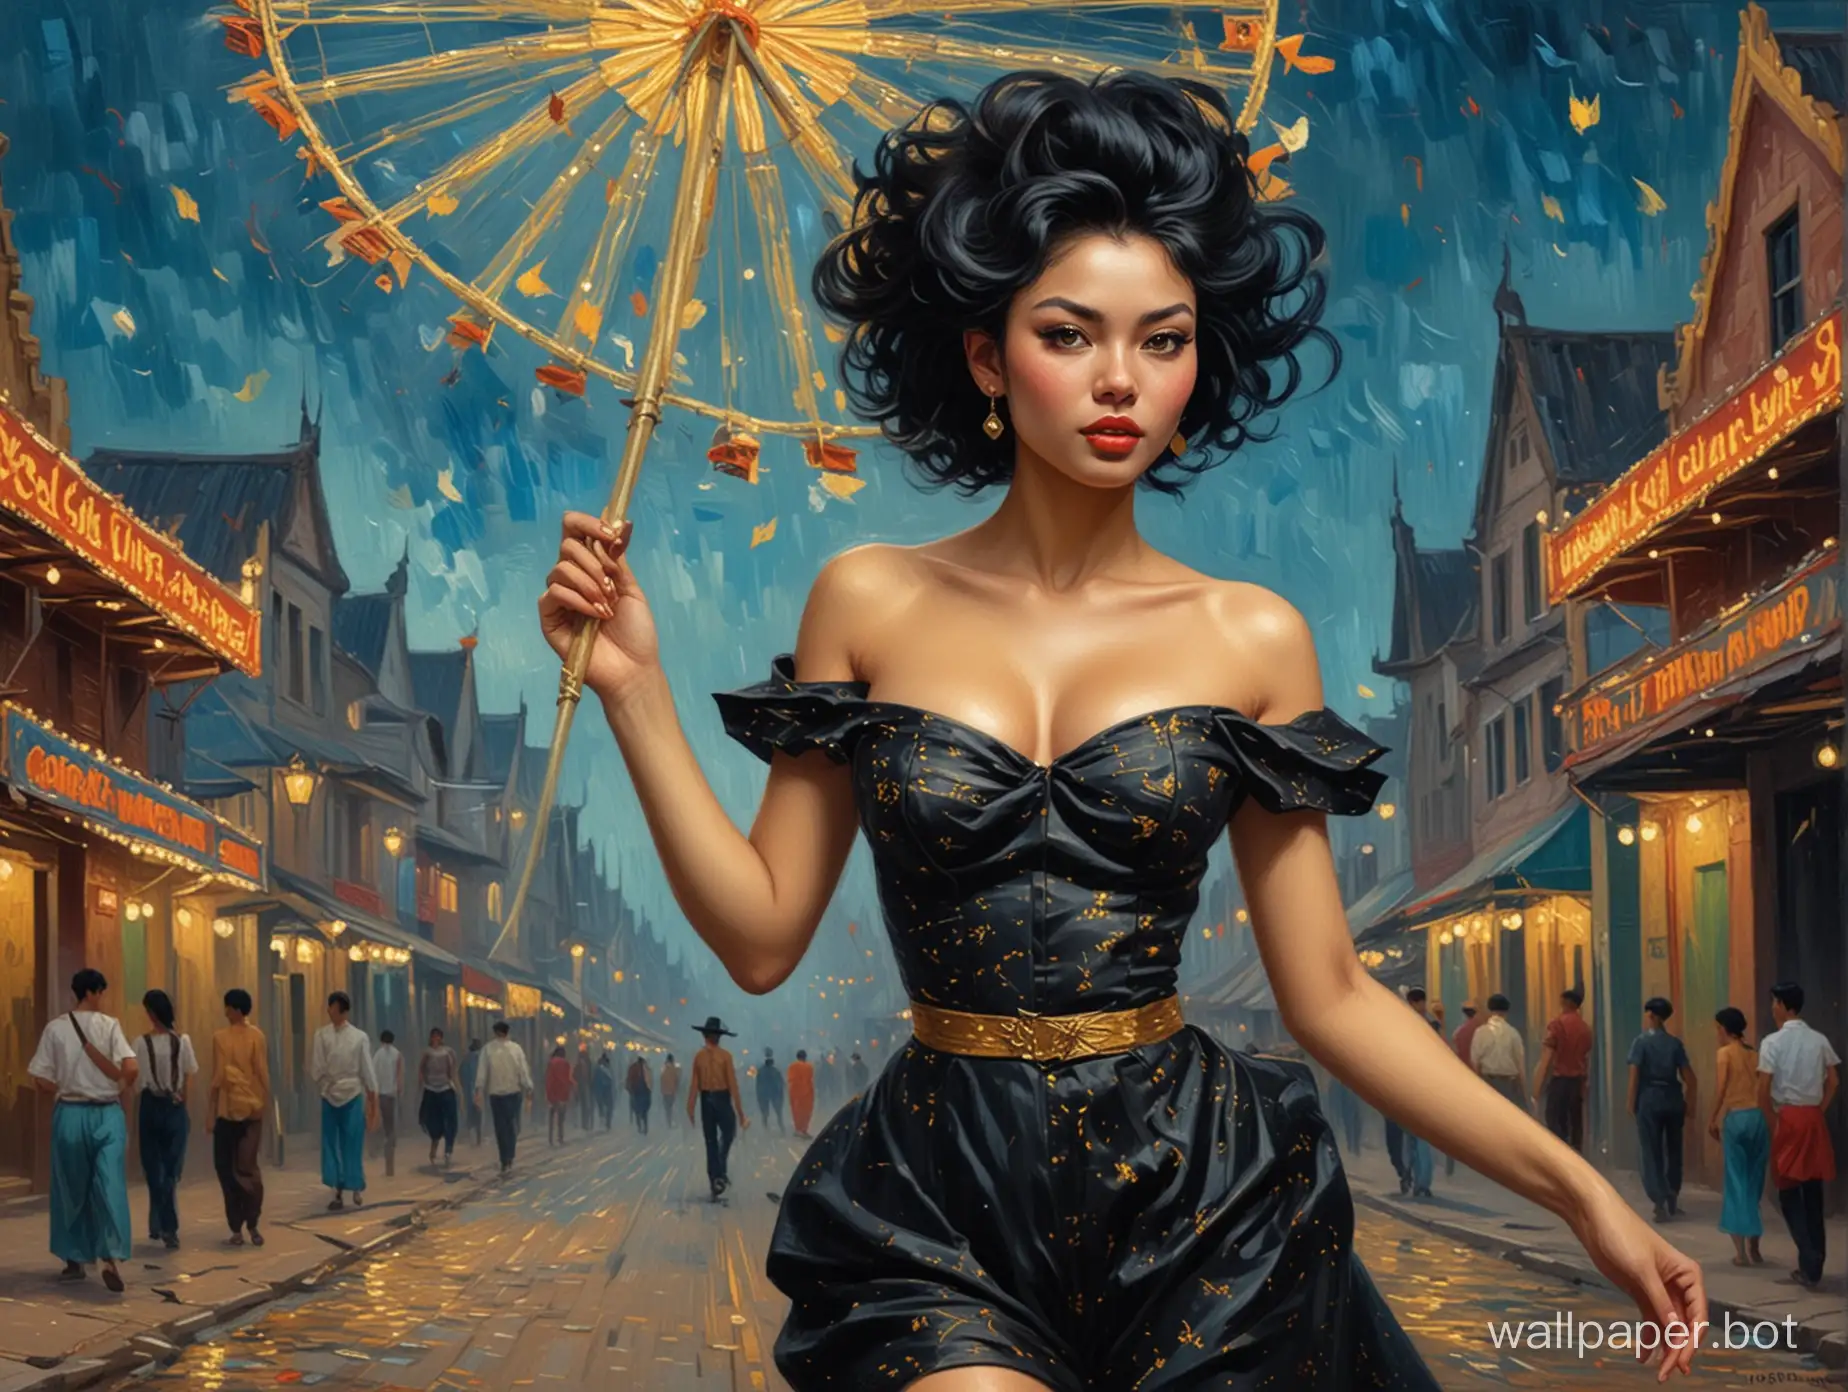 She is a Cambodian slot and slick as the cat with nothing on just her orbit walking on the wild side at the carnival, her wide hips and narrow waistline, black hair flying on the wind, style of Vincent van Gogh romantic mood